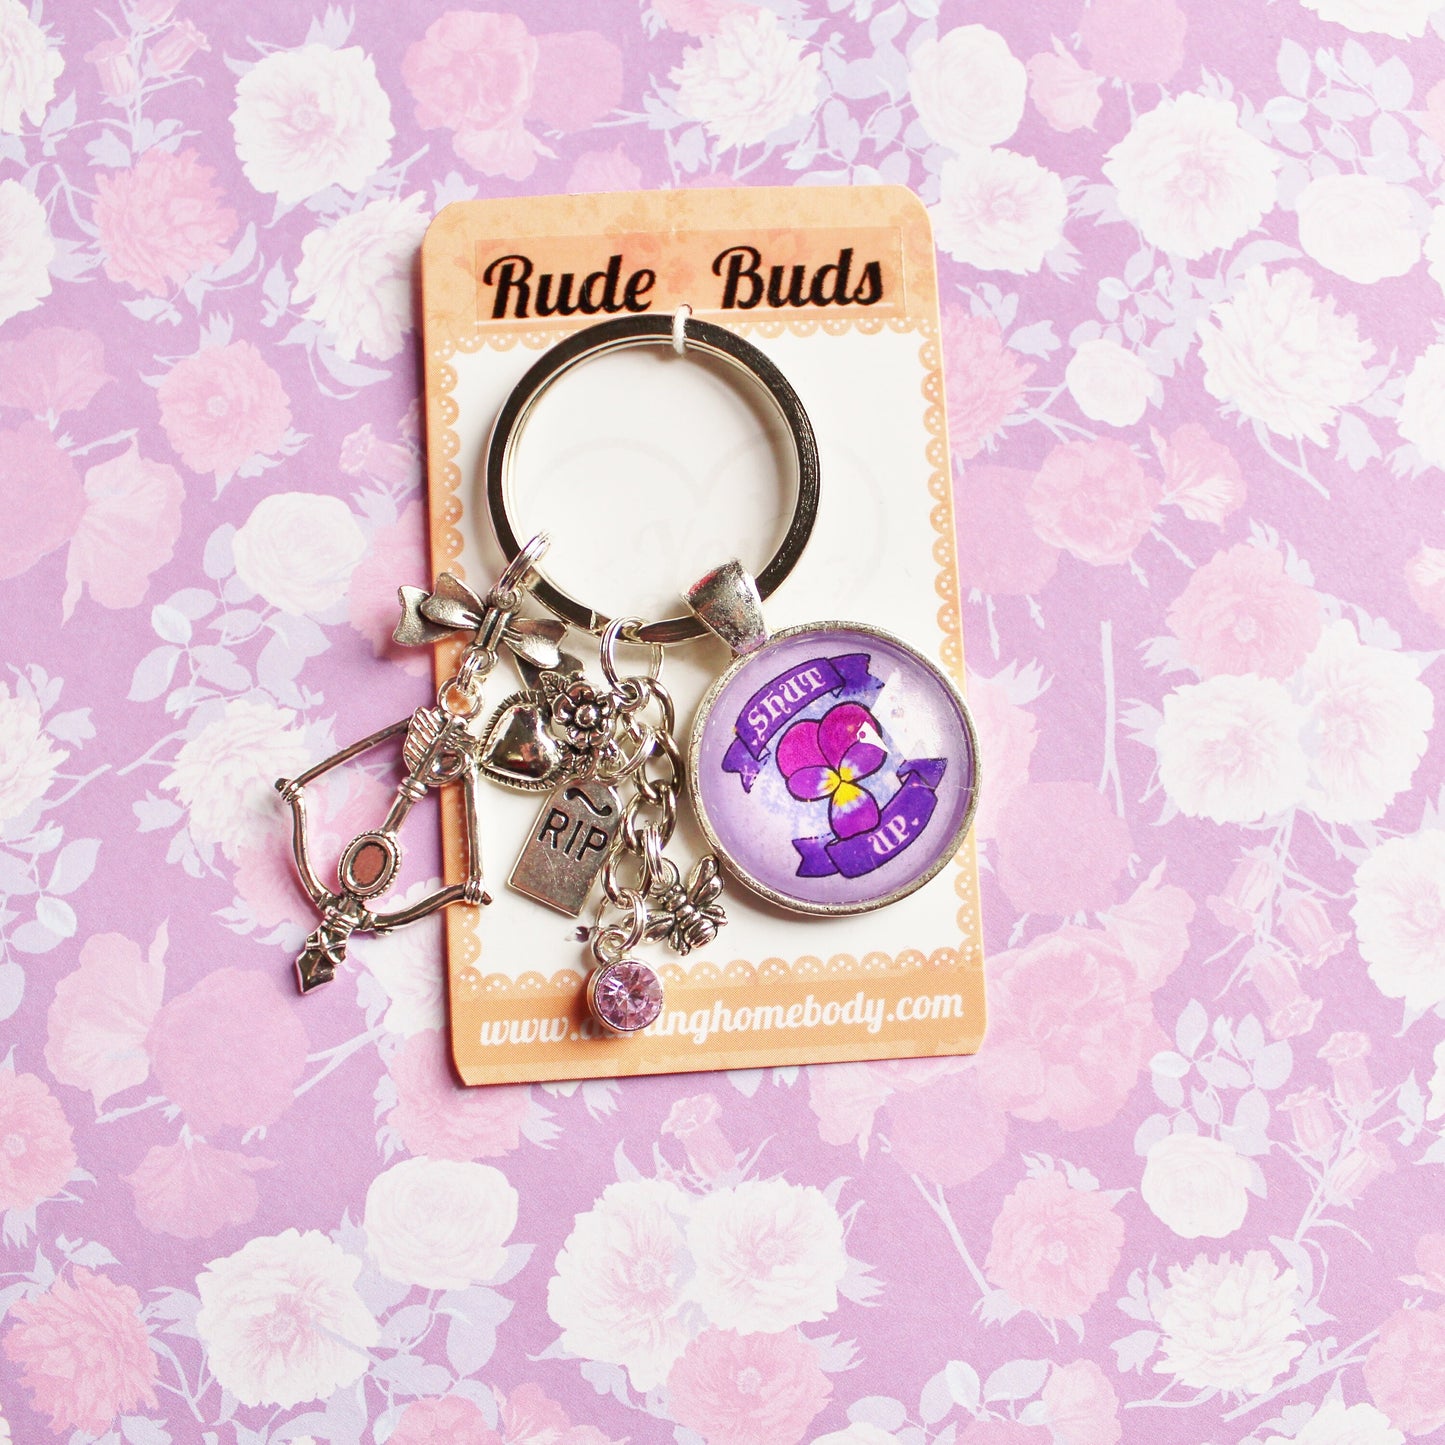 Shut Up Rude Buds Key Chain. Flower Sarcastic Keychains for Women. Bag Accessories. Floral Pastel Punk Keychain Charm. Gift for Car Keys.